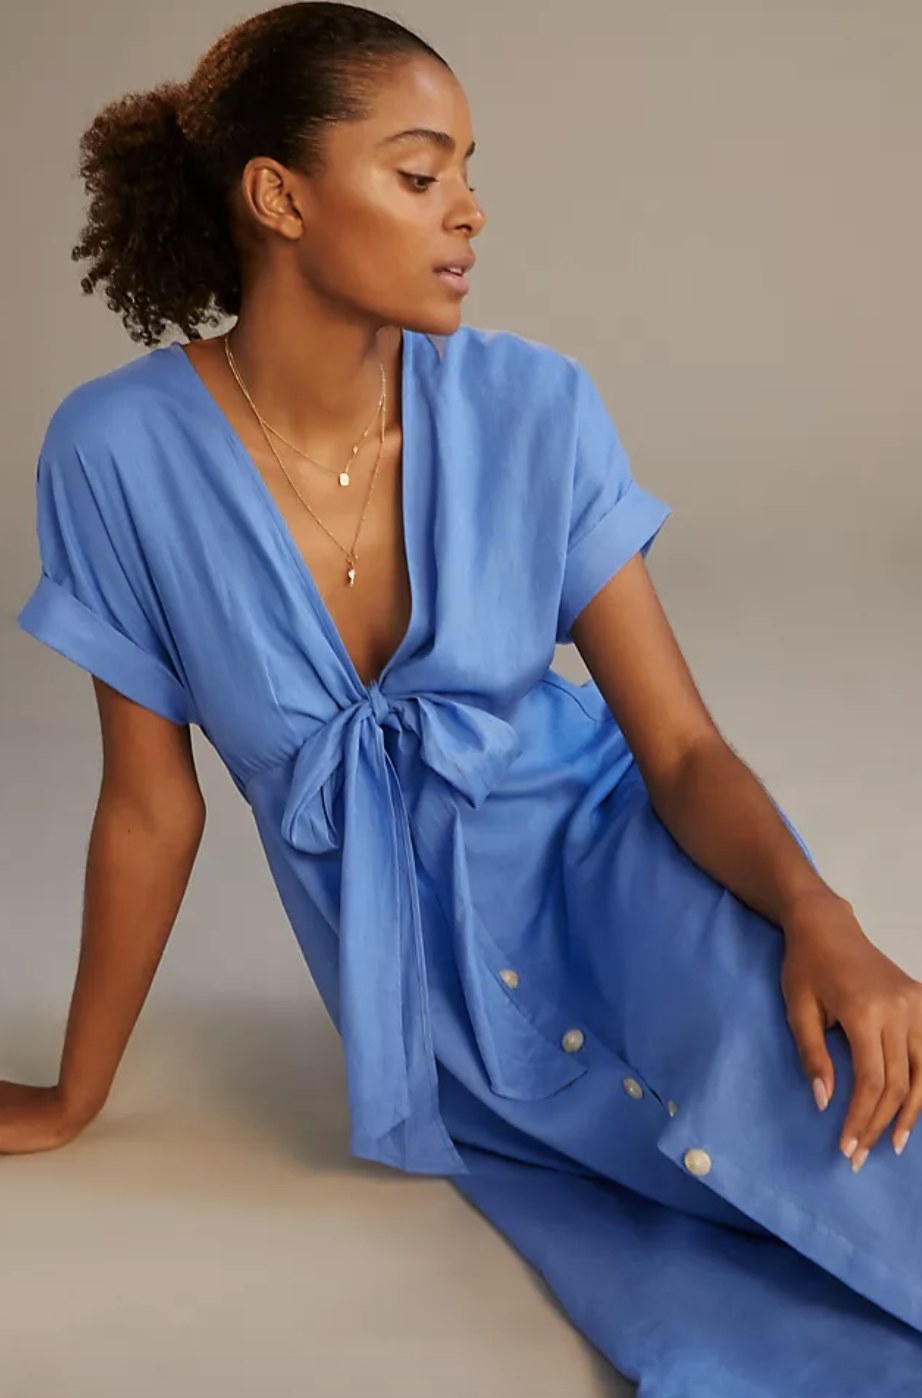 An adult sits and poses in the blue linen dress with a tie front and layer of buttons down the front